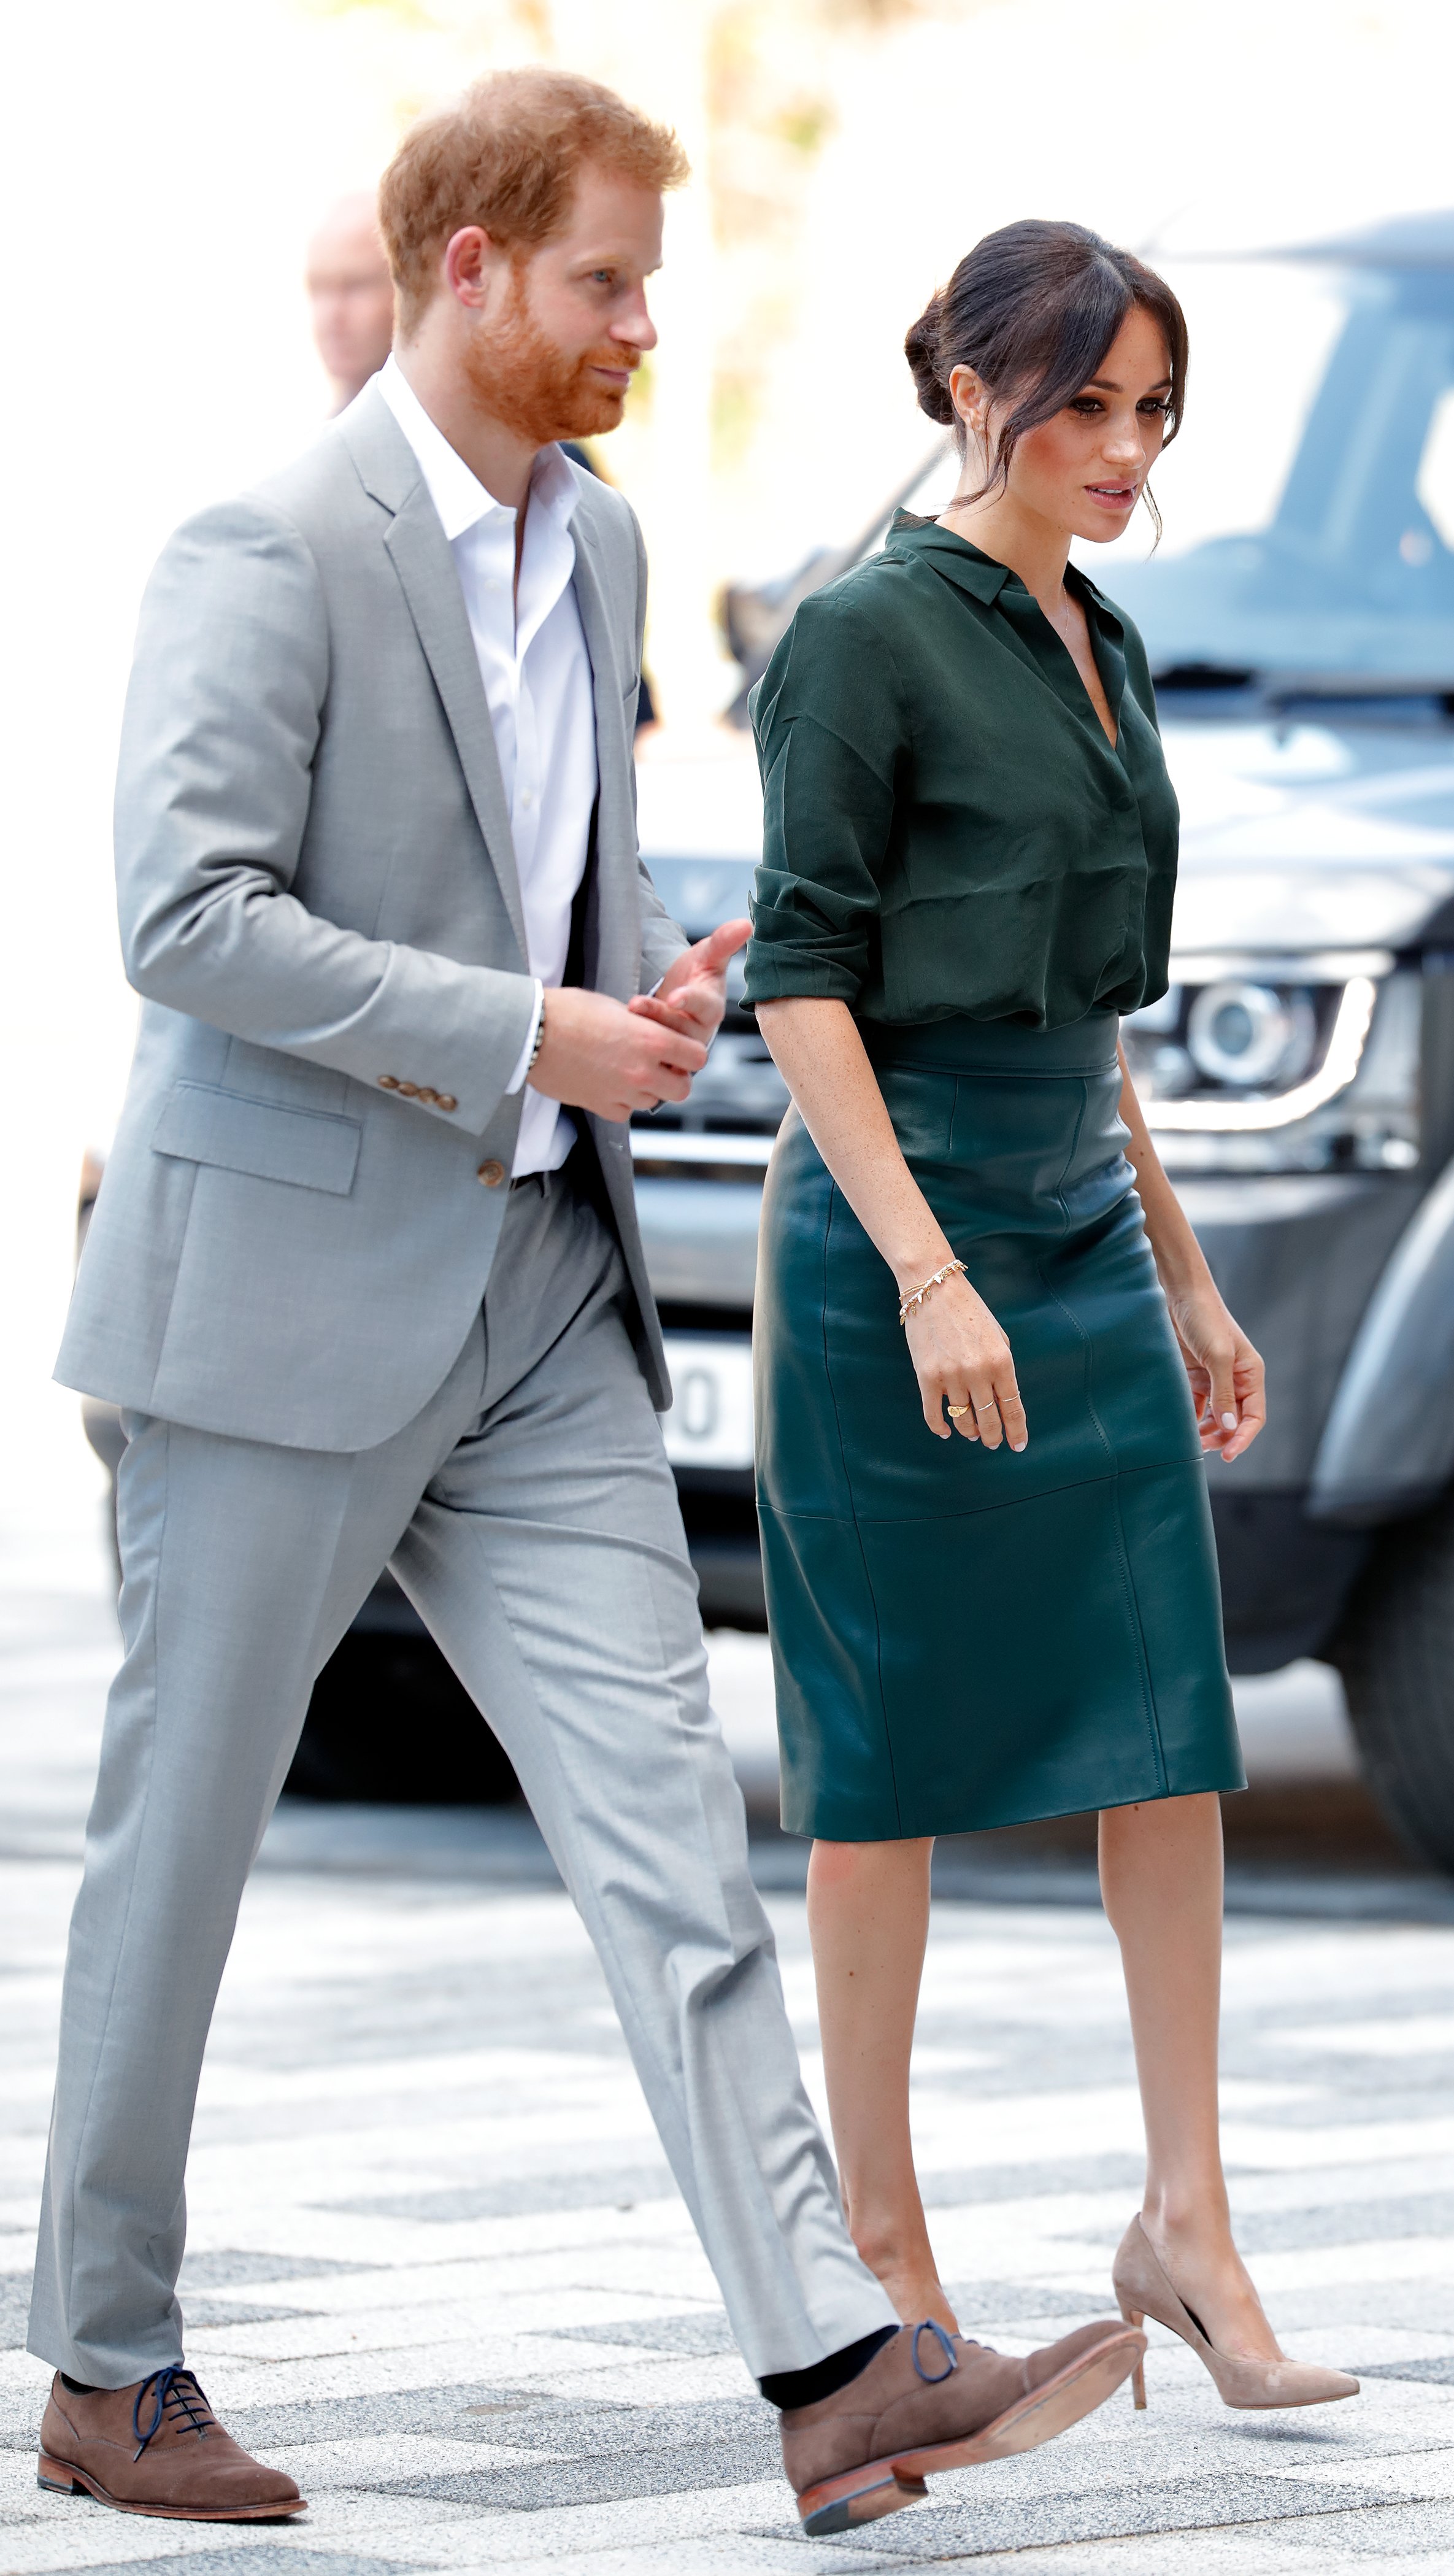 Prince Harry and Meghan Markle during their visit at the University of Chichester's Engineering and Technology Park on October 3, 2018 in Bognor Regis, England. | Source: Getty Images